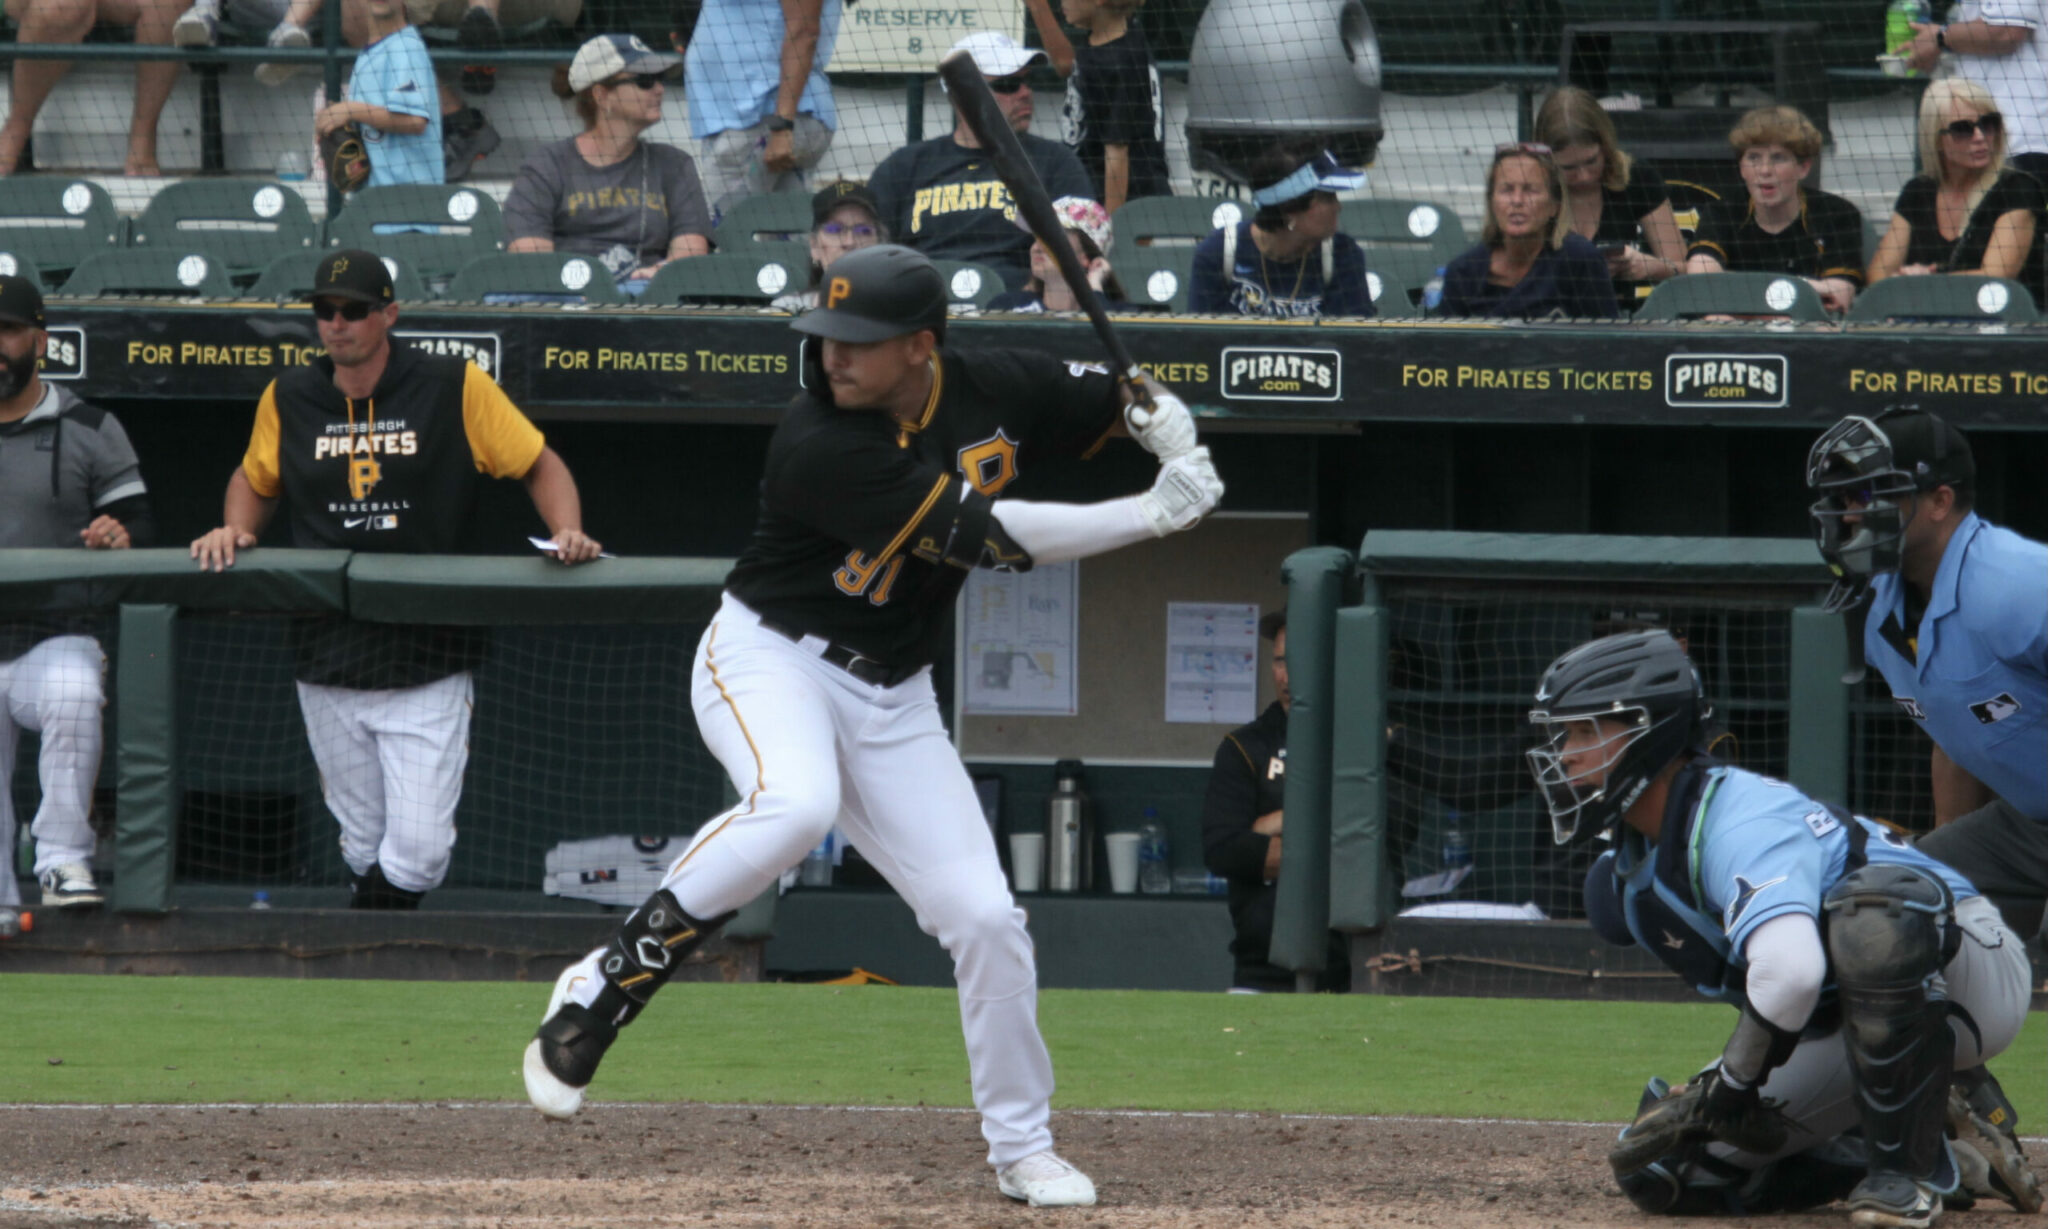 Pirates Roundtable: When Did Realize You Would Reach the Majors?